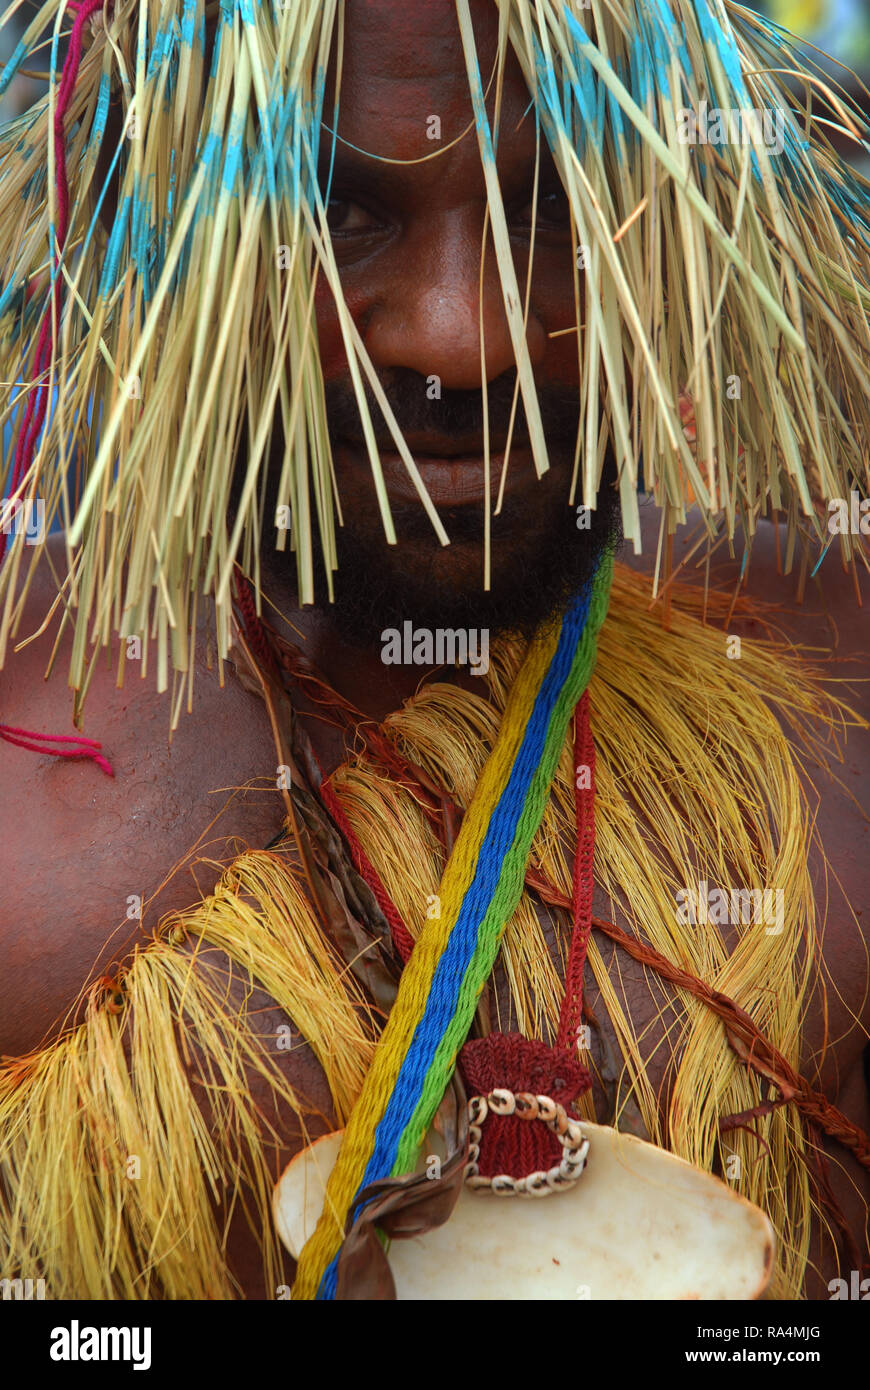 Colourfully dressed and face painted man wearing a straw hat dancing as part of a Sing Sing in Madang, Papua New Guinea. Stock Photo